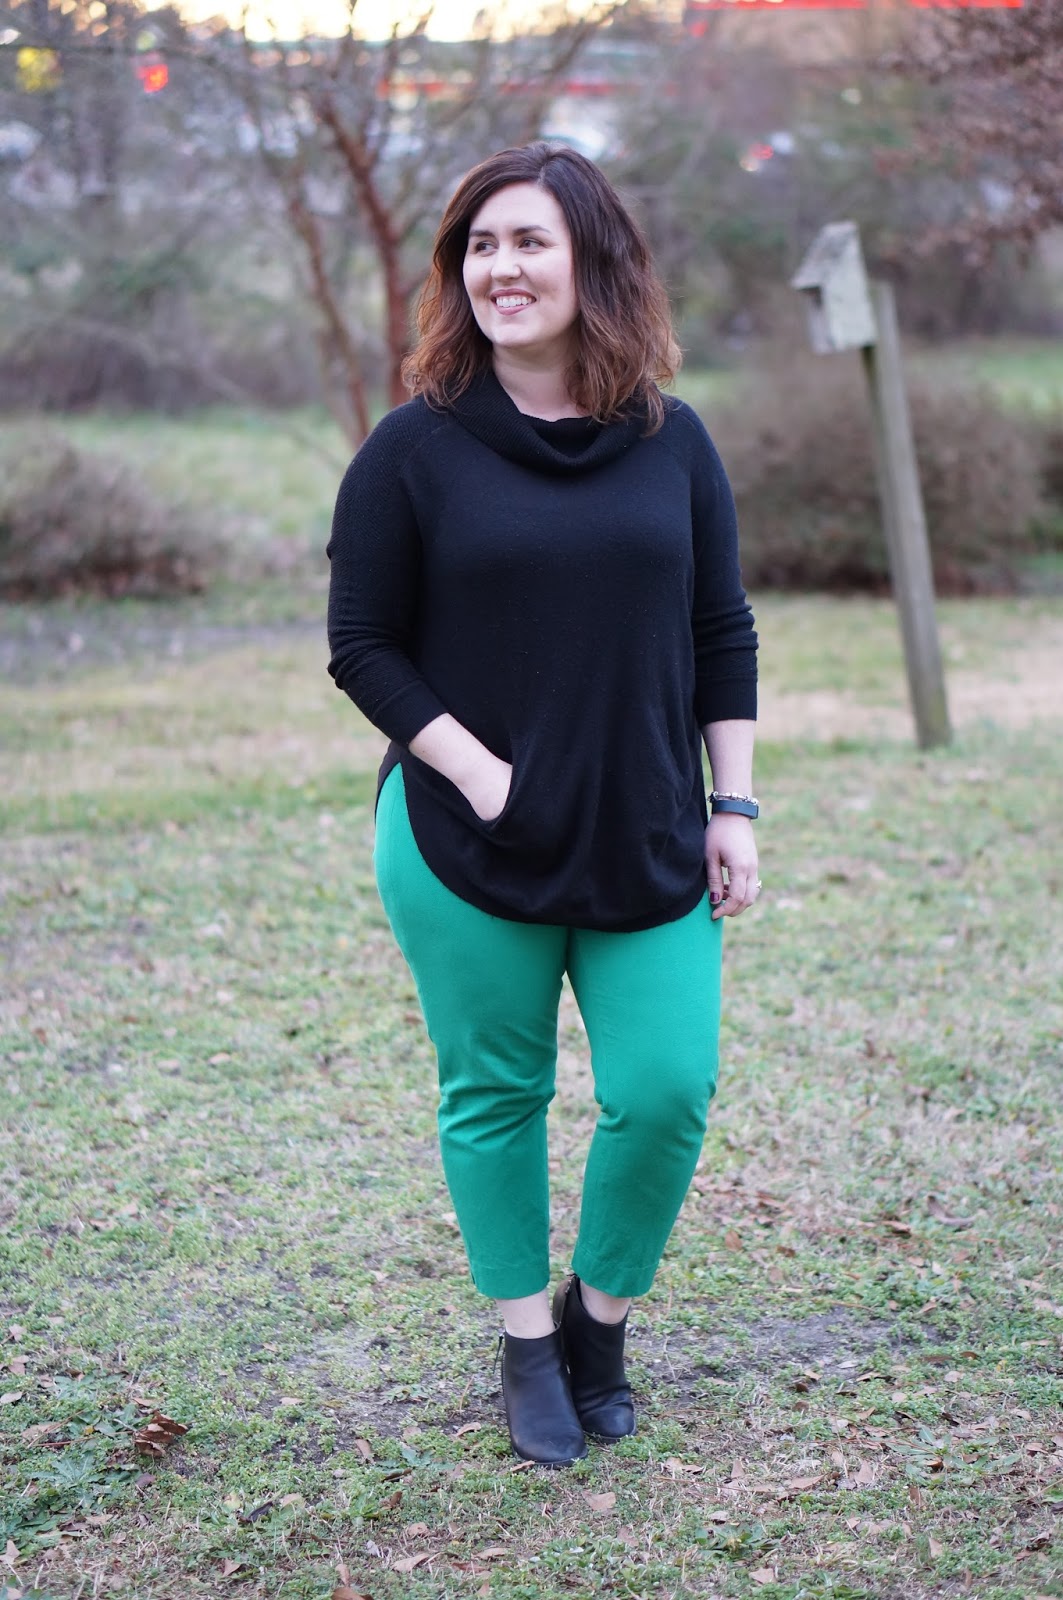 Rebecca Lately Colorblocking Kate Spade Studs Fate Stitch Fix Sweater Banana Republic Ankle Pants Target Jameson Booties